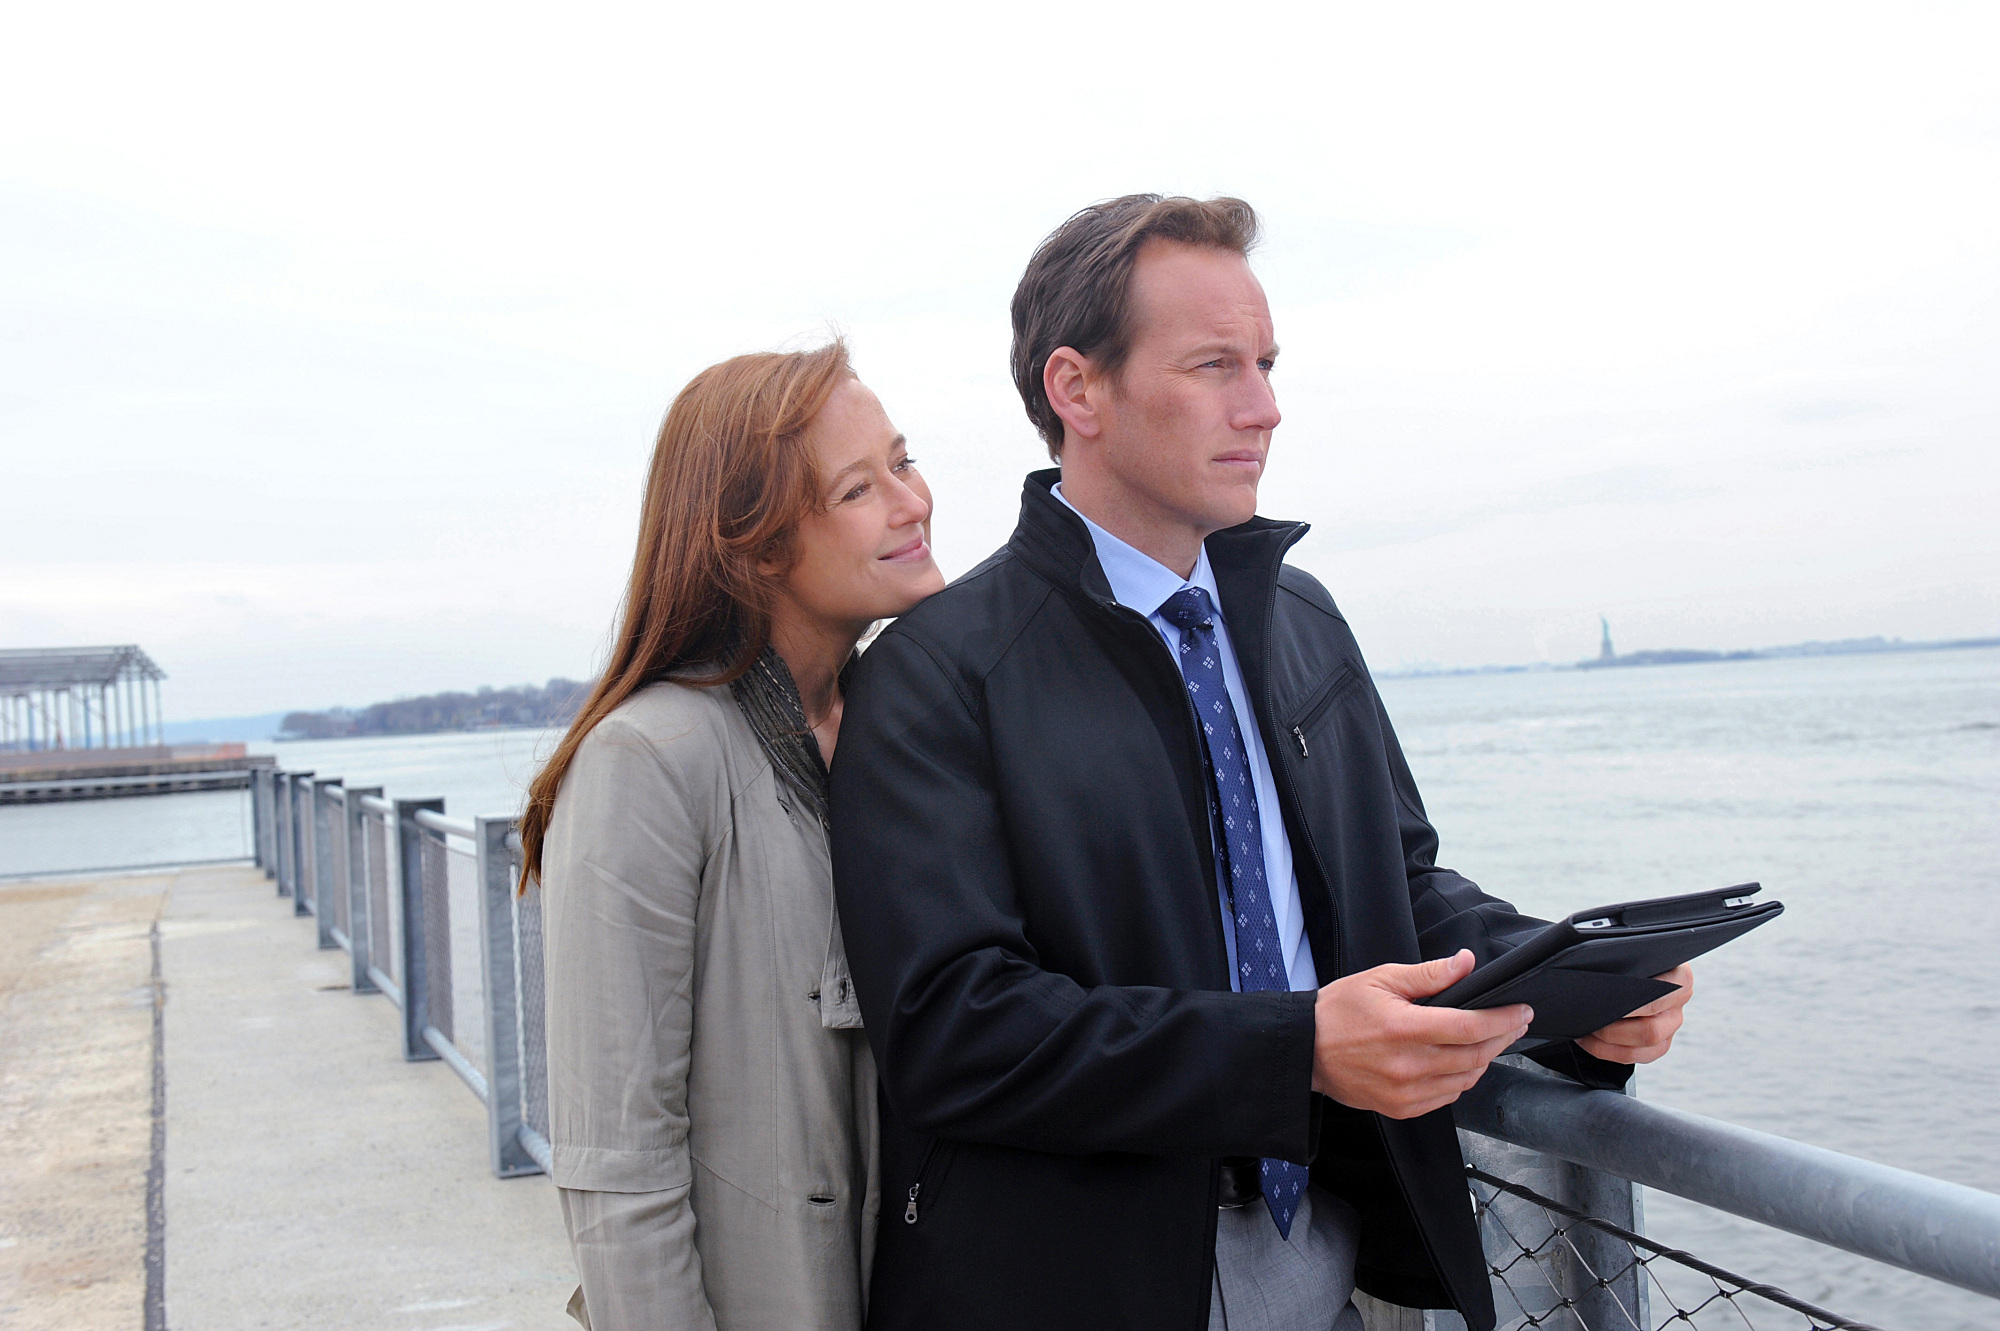 Still of Jennifer Ehle and Patrick Wilson in A Gifted Man (2011)